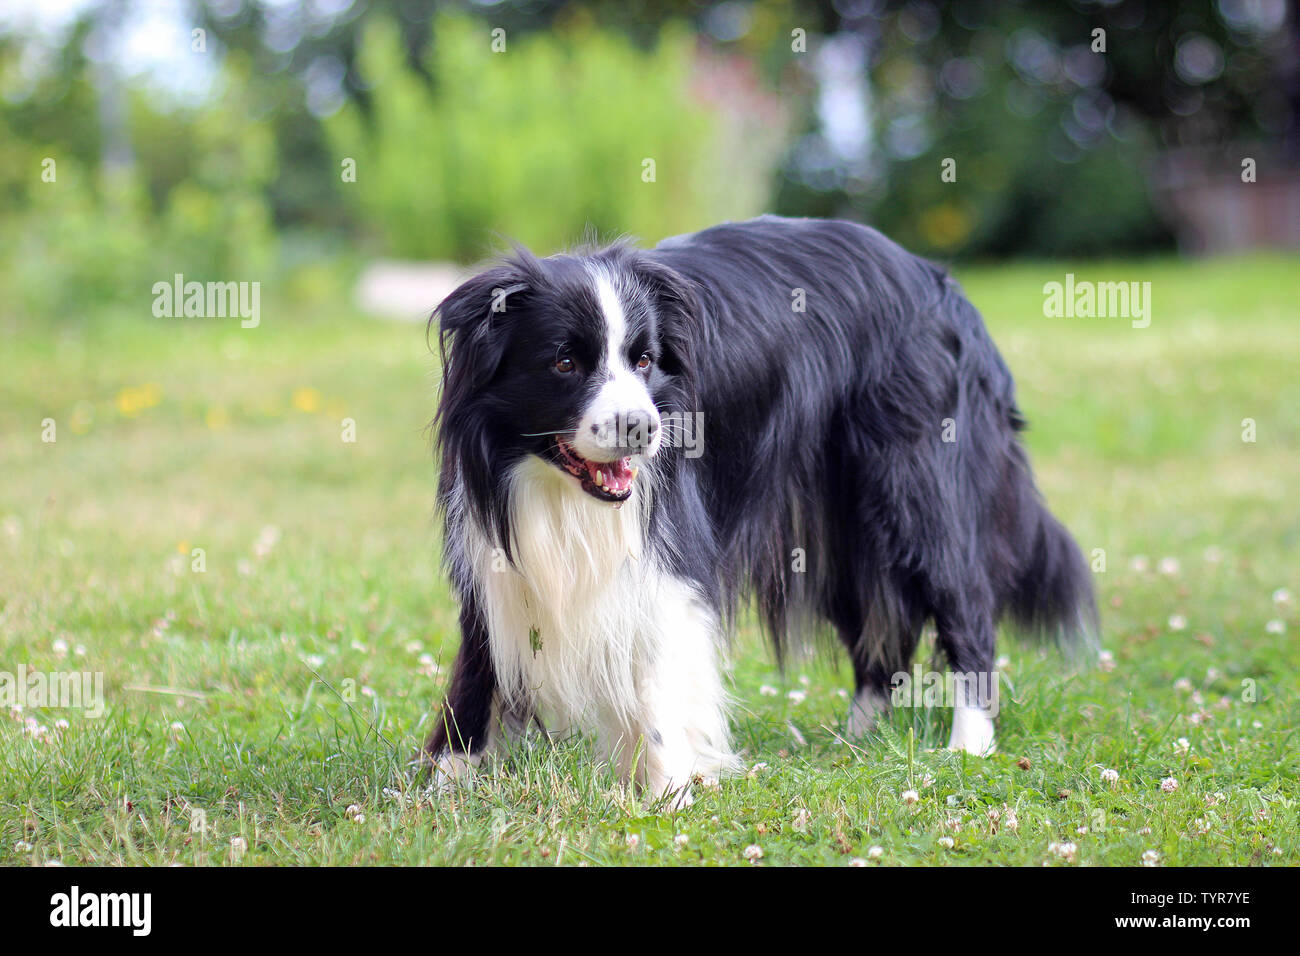 Portrait of Border collie. Dog is standing in grass in park. It is long hair black and white border collie. Stock Photo